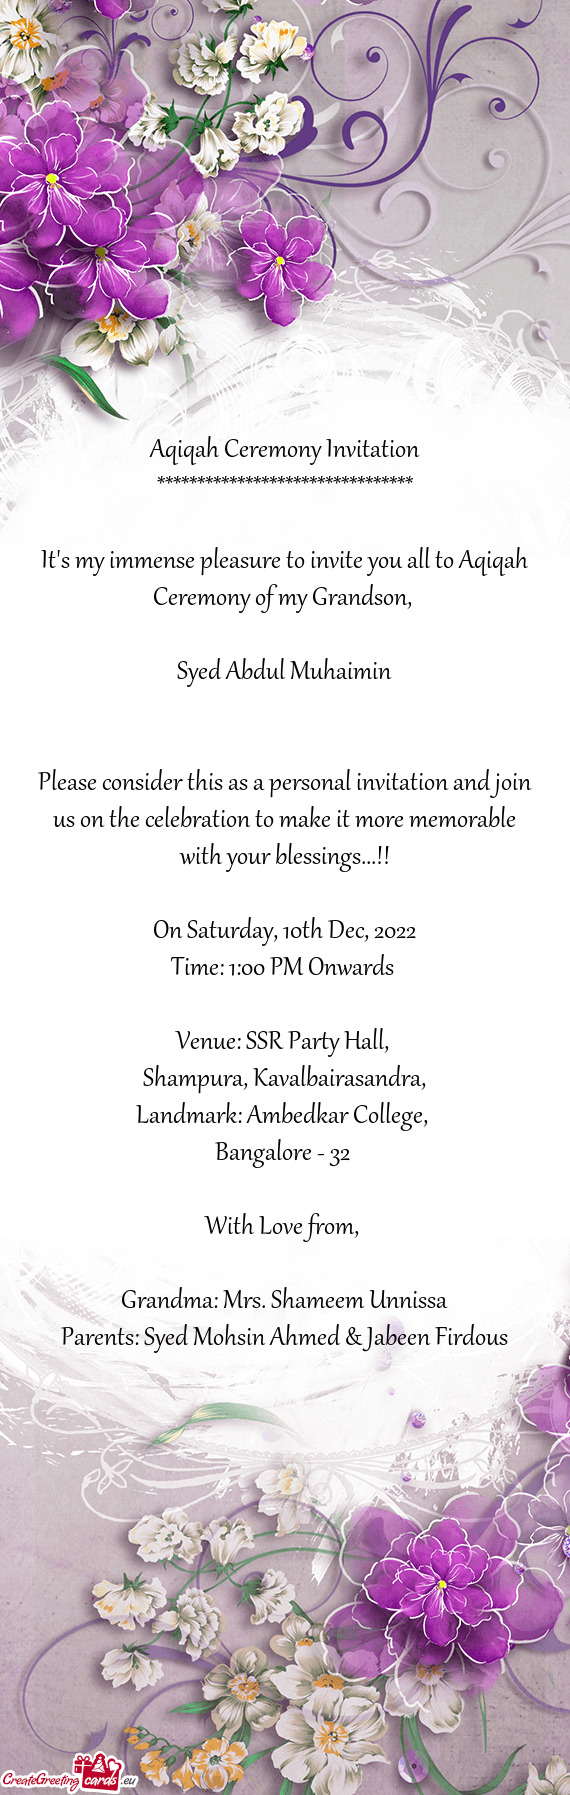 It's my immense pleasure to invite you all to Aqiqah Ceremony of my Grandson